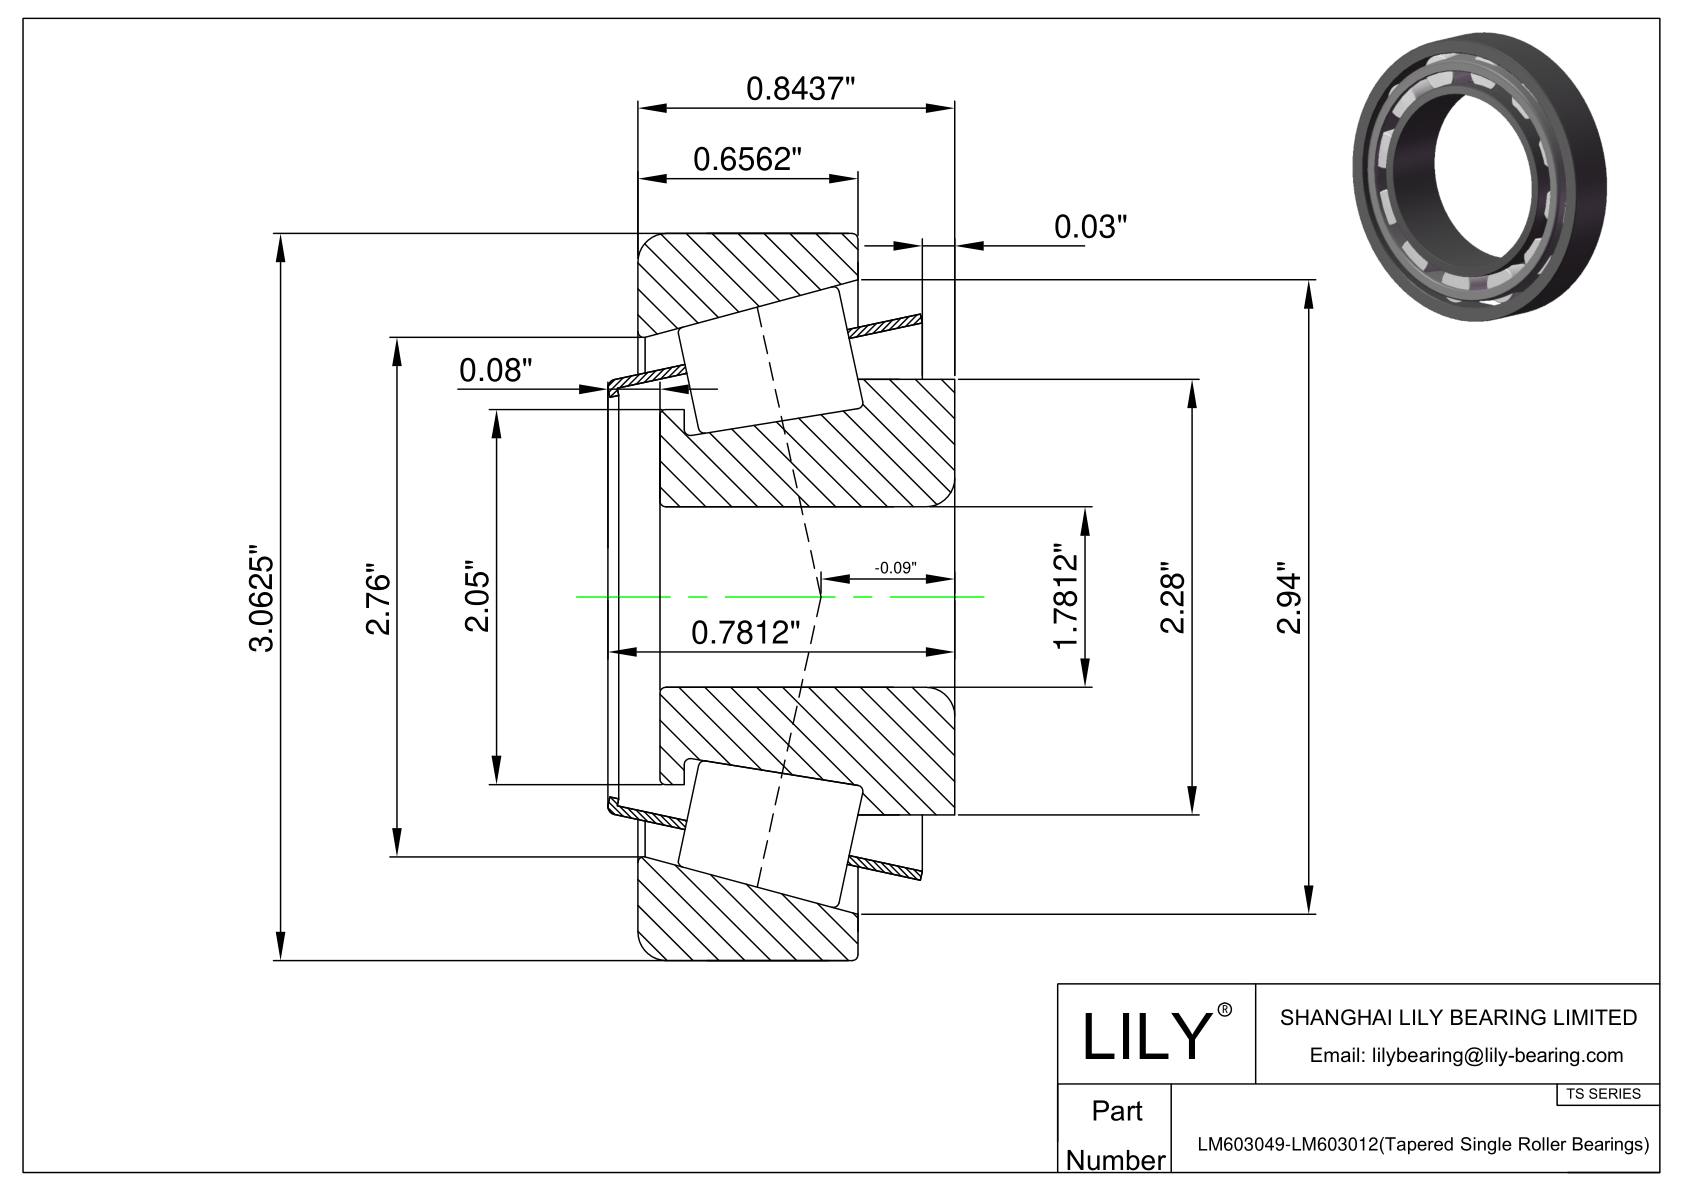 LM603049-LM603012 TS (Tapered Single Roller Bearings) (Imperial) cad drawing